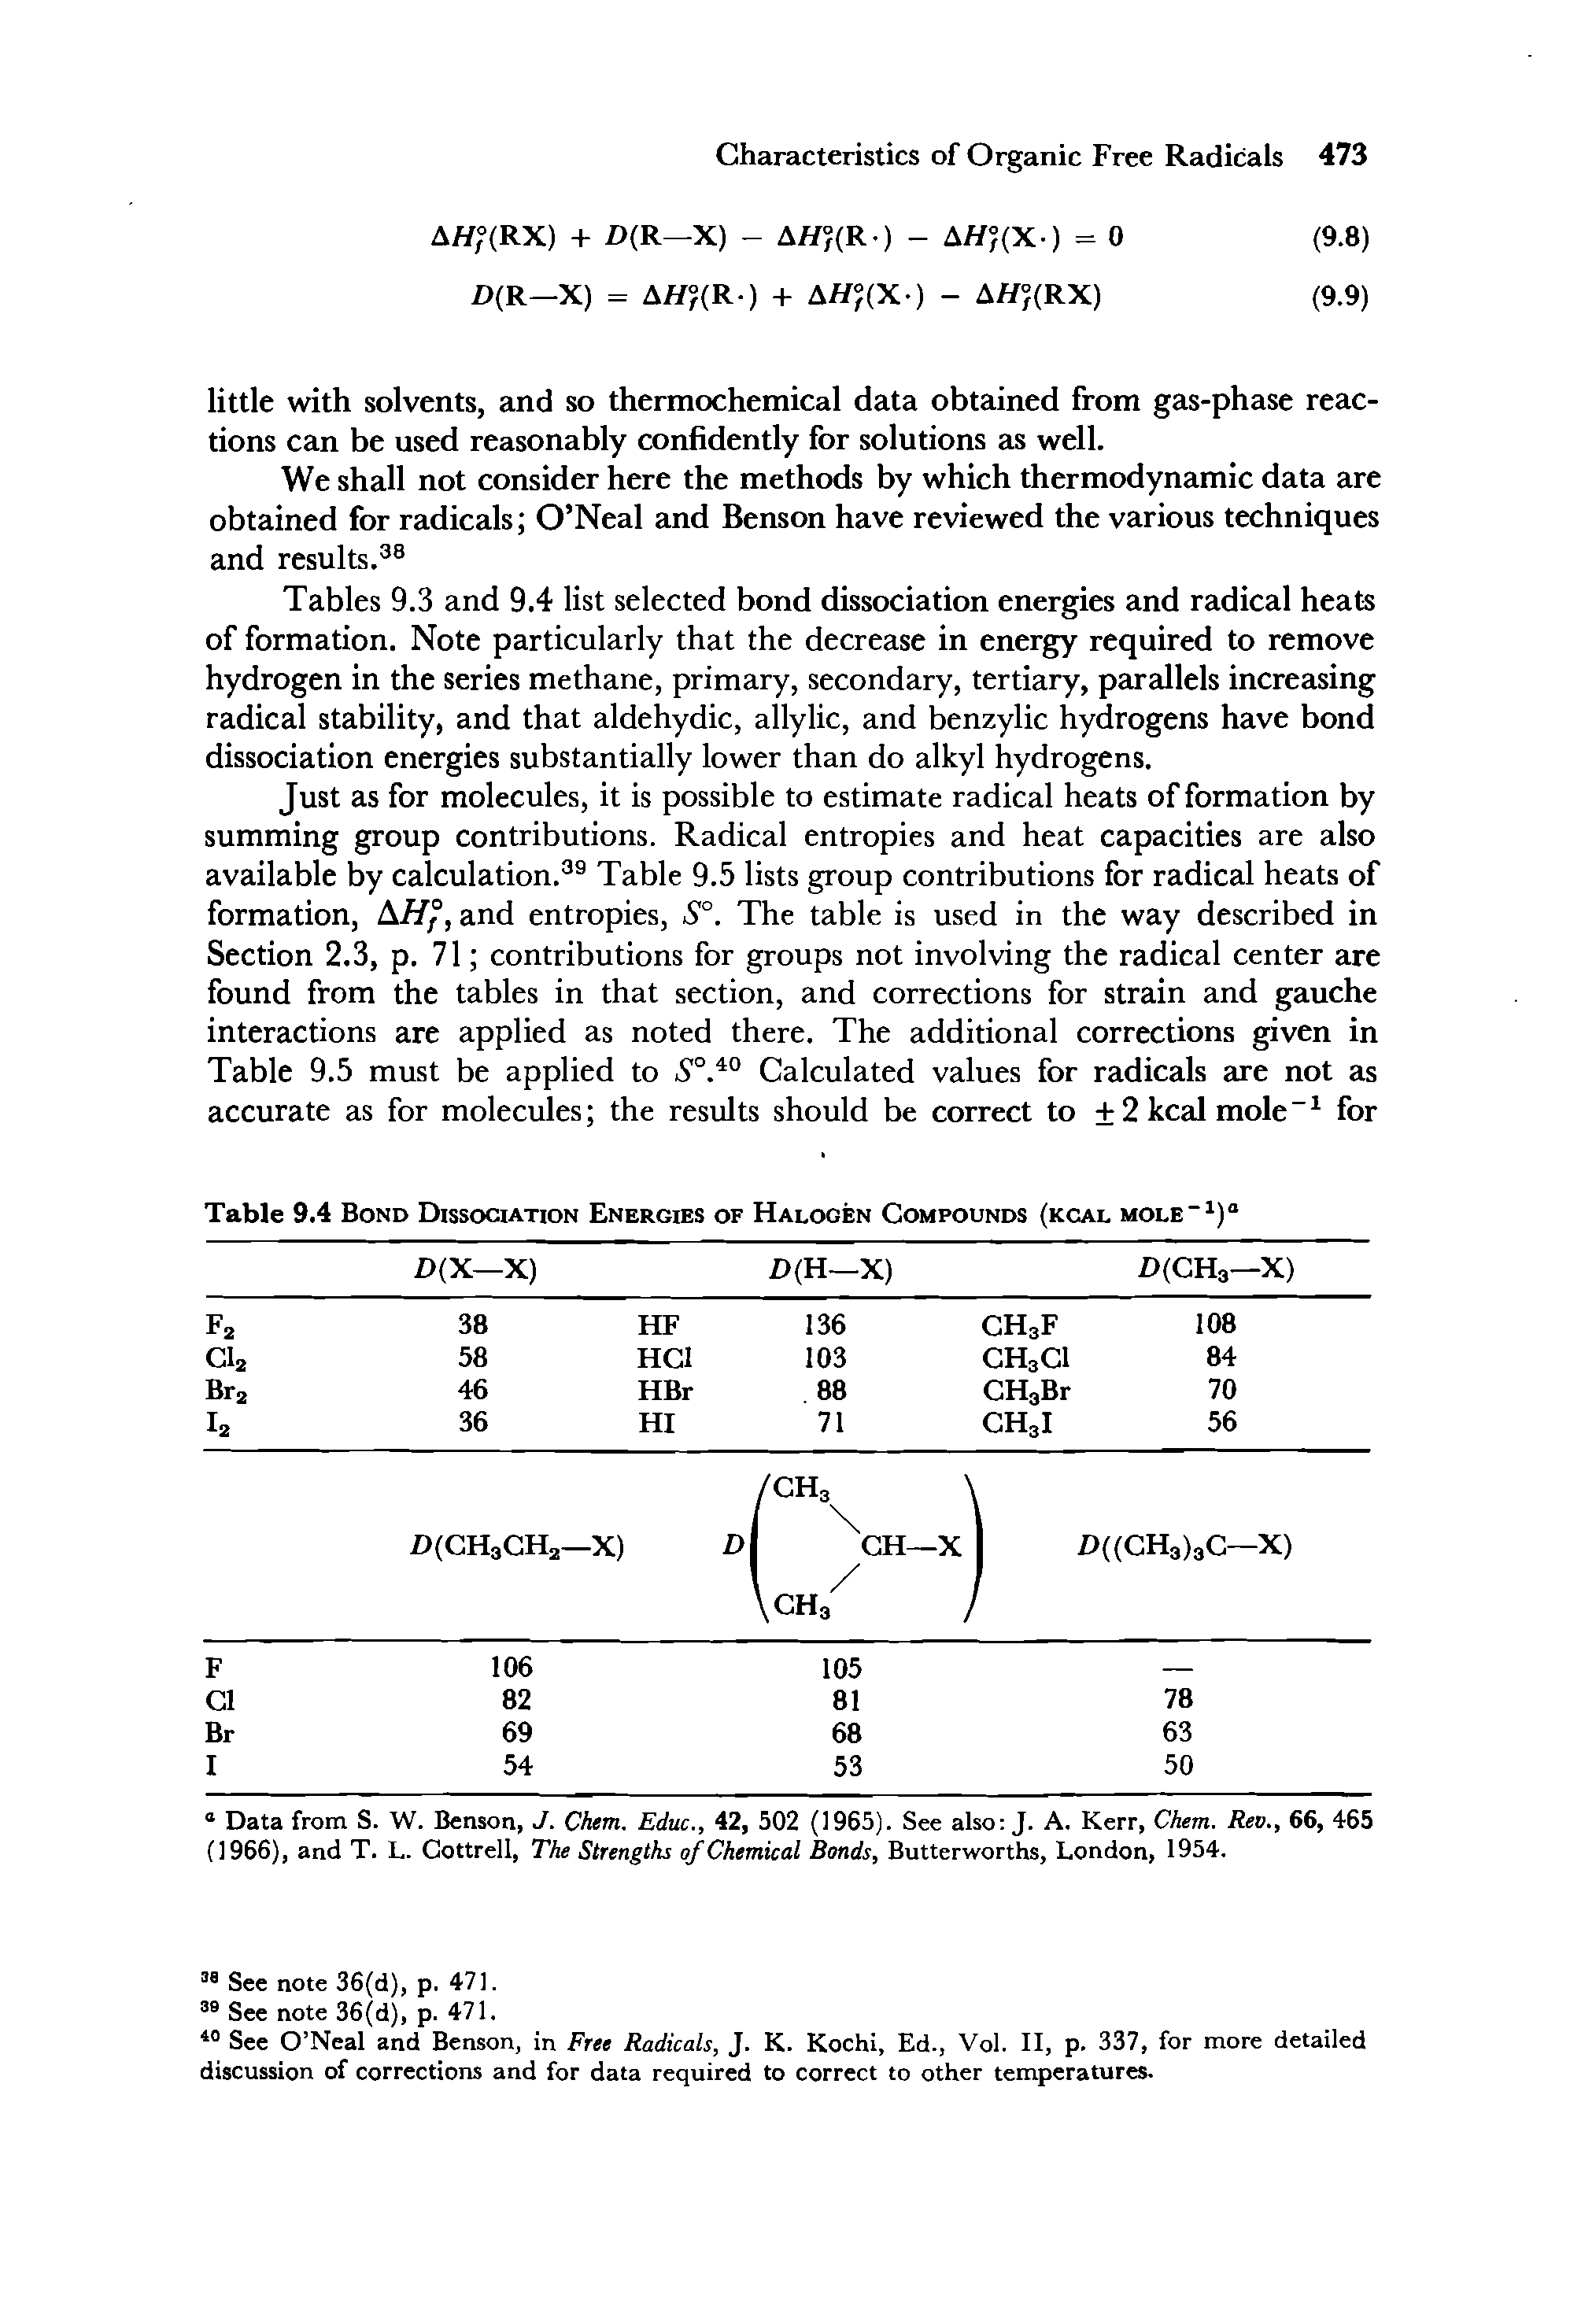 Tables 9.3 and 9.4 list selected bond dissociation energies and radical heats of formation. Note particularly that the decrease in energy required to remove hydrogen in the series methane, primary, secondary, tertiary, parallels increasing radical stability, and that aldehydic, allylic, and benzylic hydrogens have bond dissociation energies substantially lower than do alkyl hydrogens.